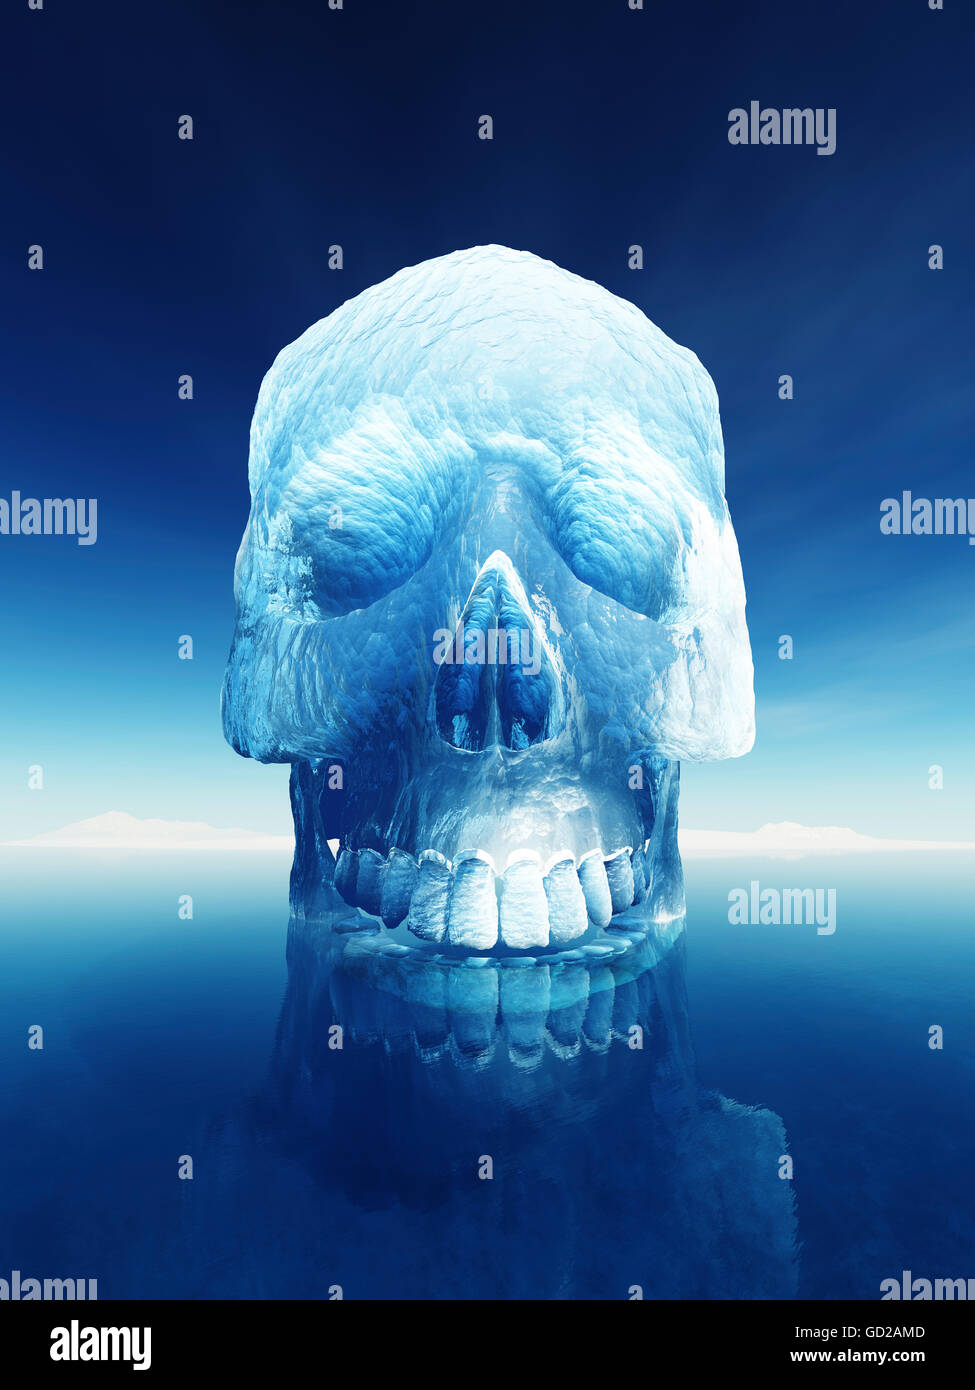 Iceberg in the shape of a human skull. Conceptual image of inherent danger of an iceberg or the arctic meltdown Stock Photo